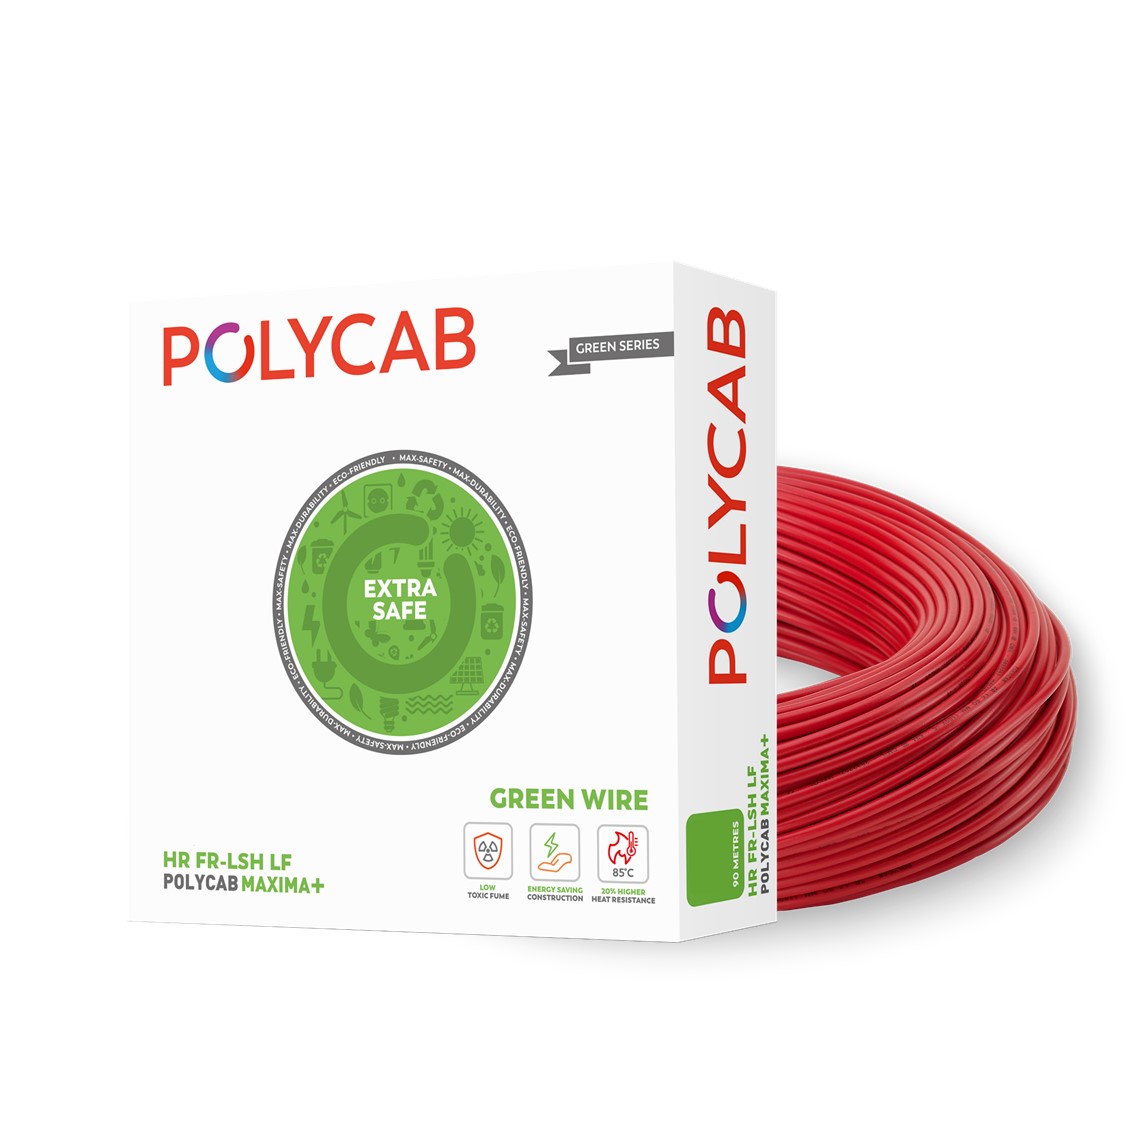 Polycab Electric Fittings Components in Bangalore - Dealers, Manufacturers  & Suppliers -Justdial